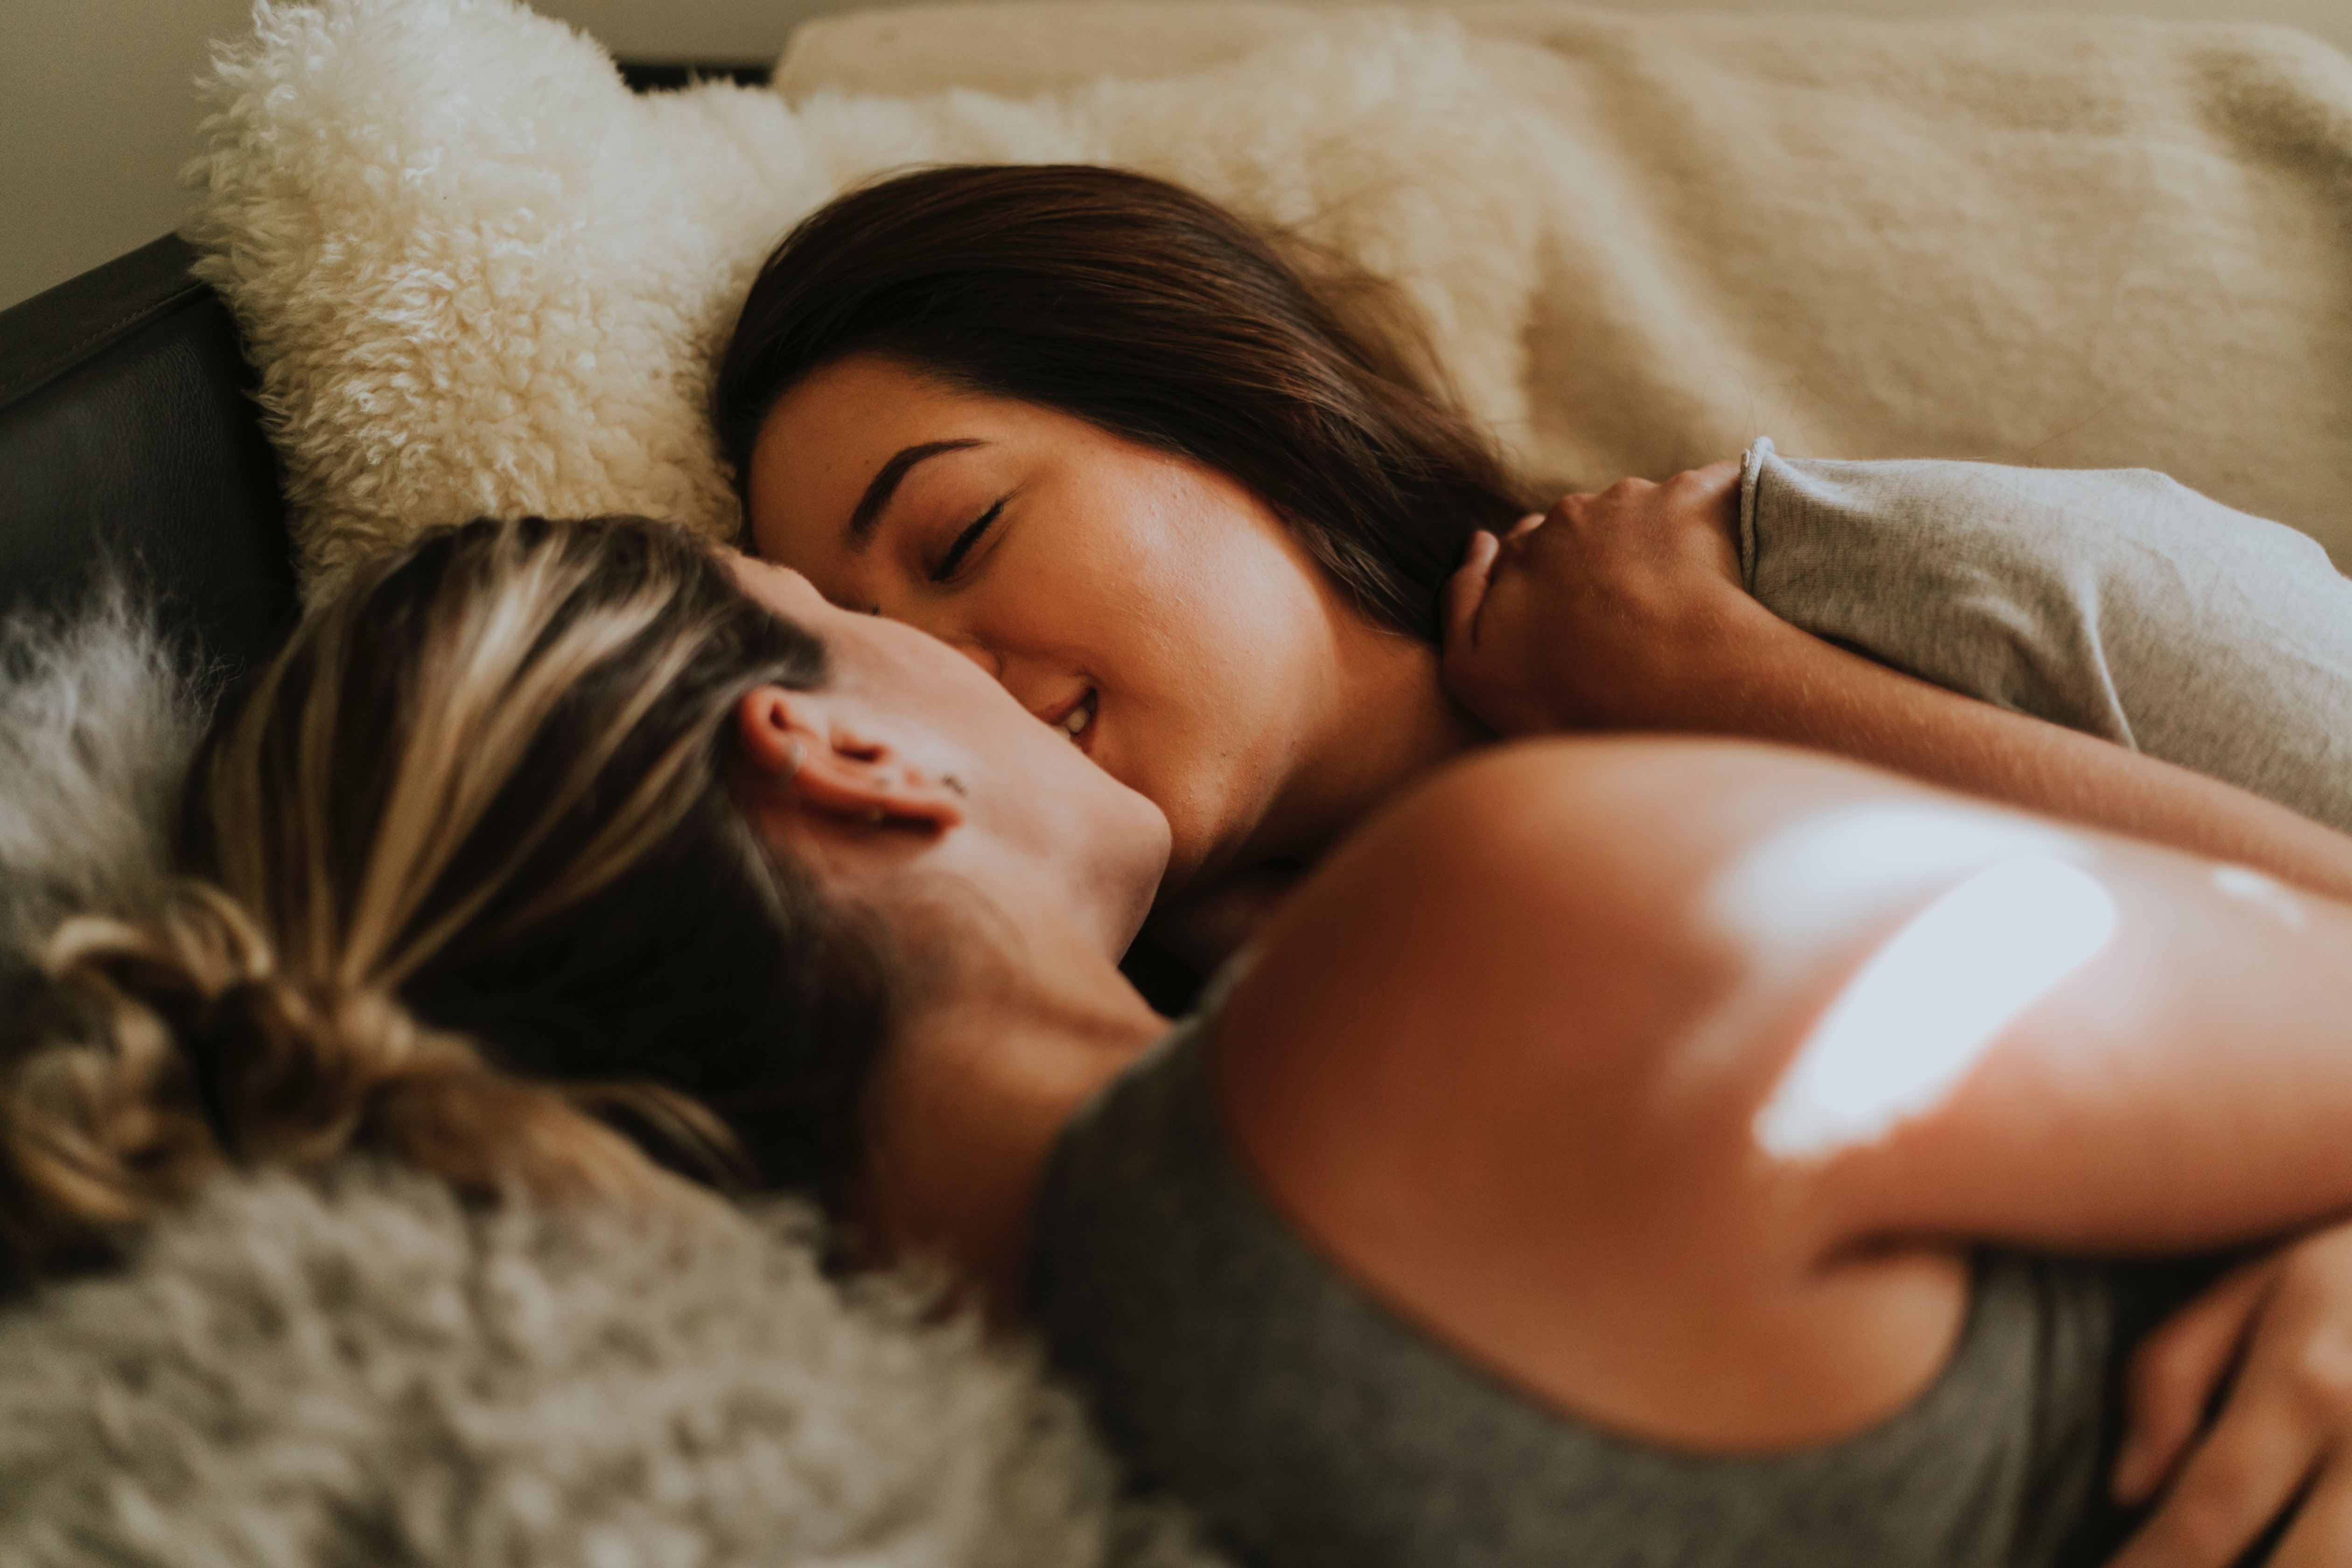 Lesbian porn is the most popular genre of 2018 | PinkNews